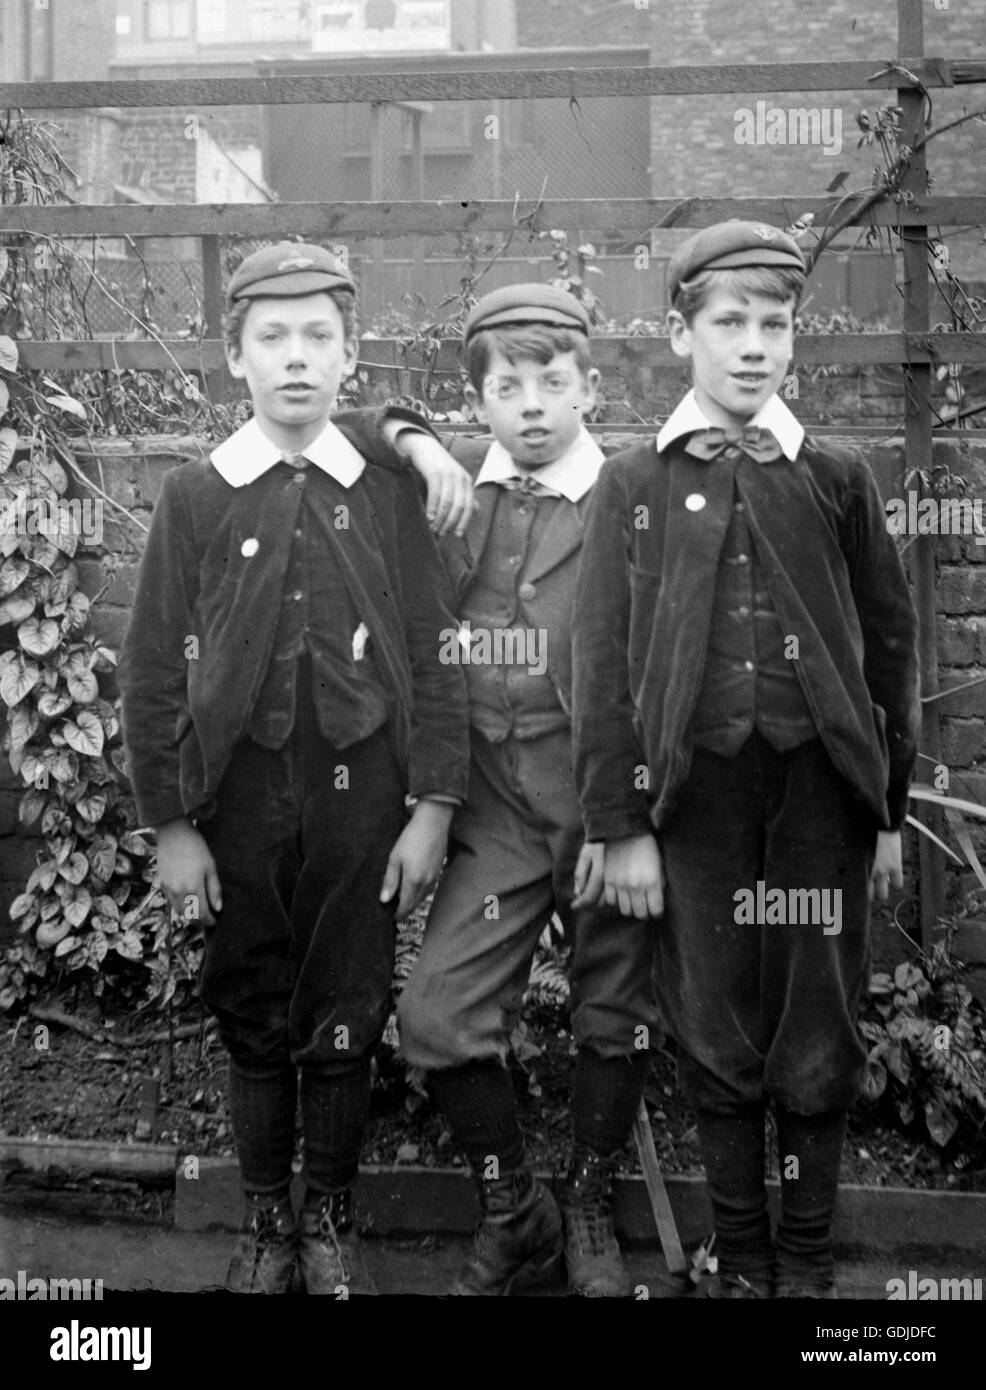 Three boys pose in caps, jackets and trousers. C1910. Photograph by Tony Henshaw Stock Photo